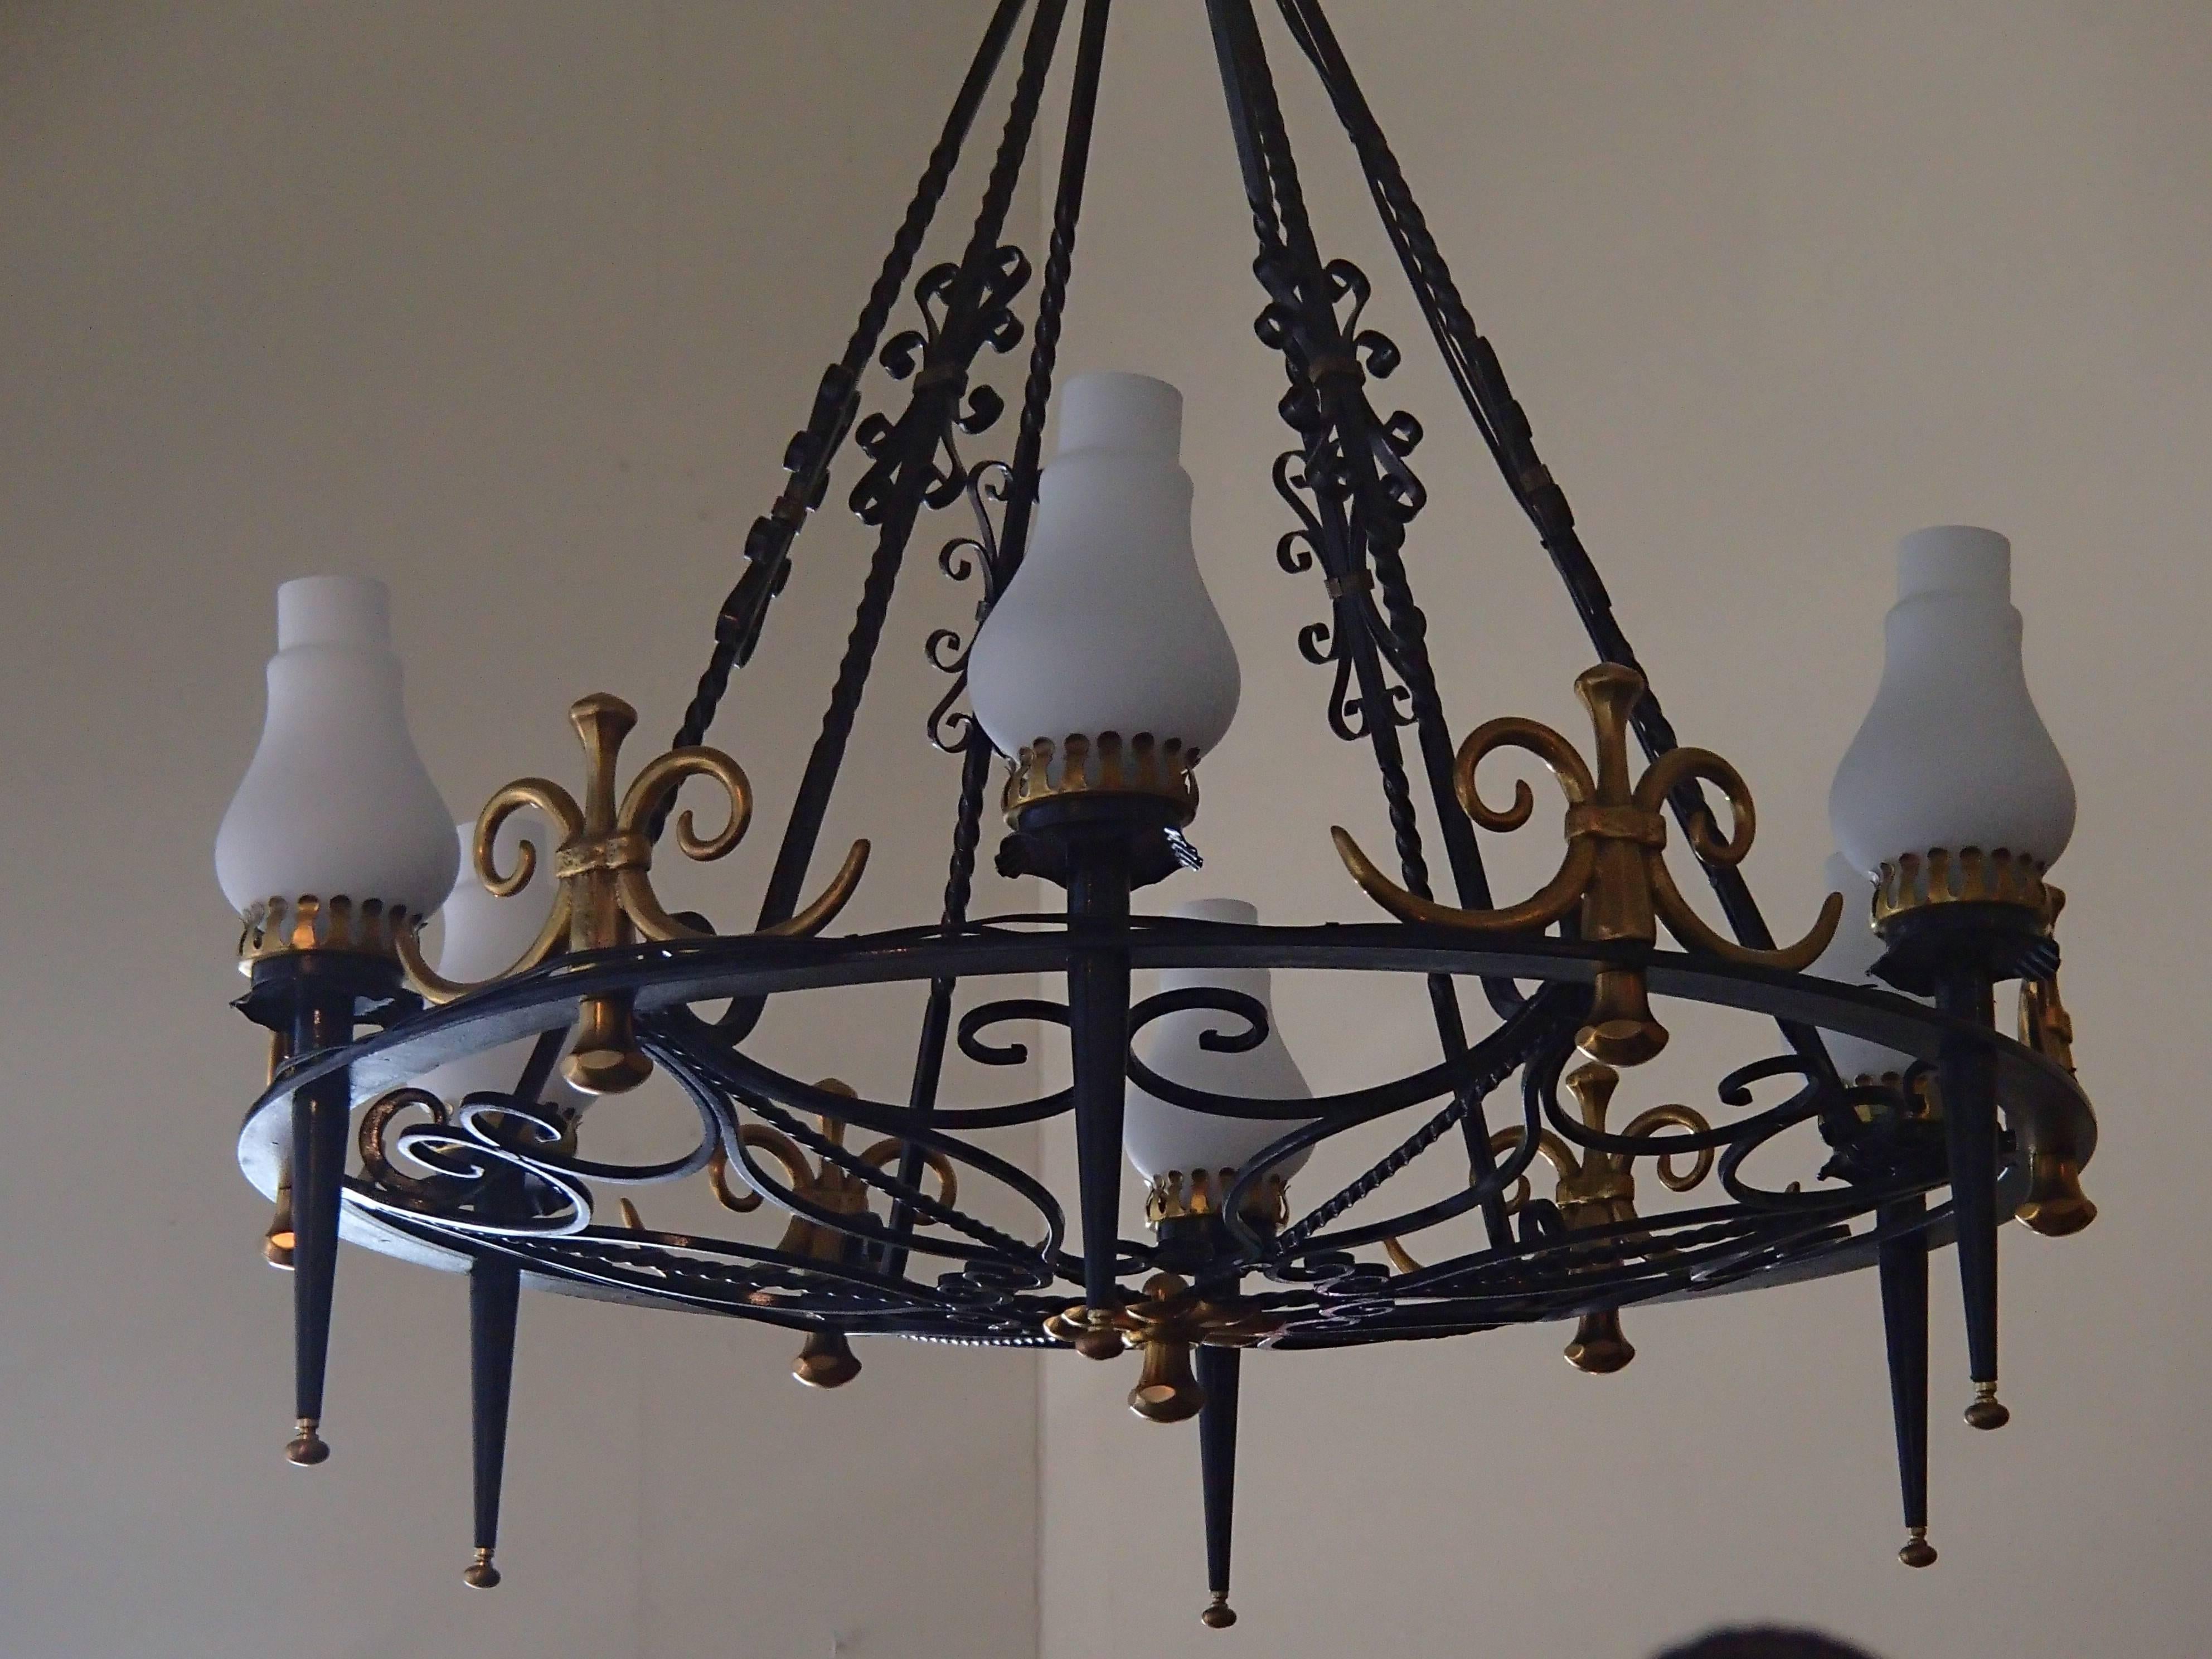 Hughes decorative 1940 chandelier made of wrought iron and brass ornaments six opal glasses. Rewired and ready to use.